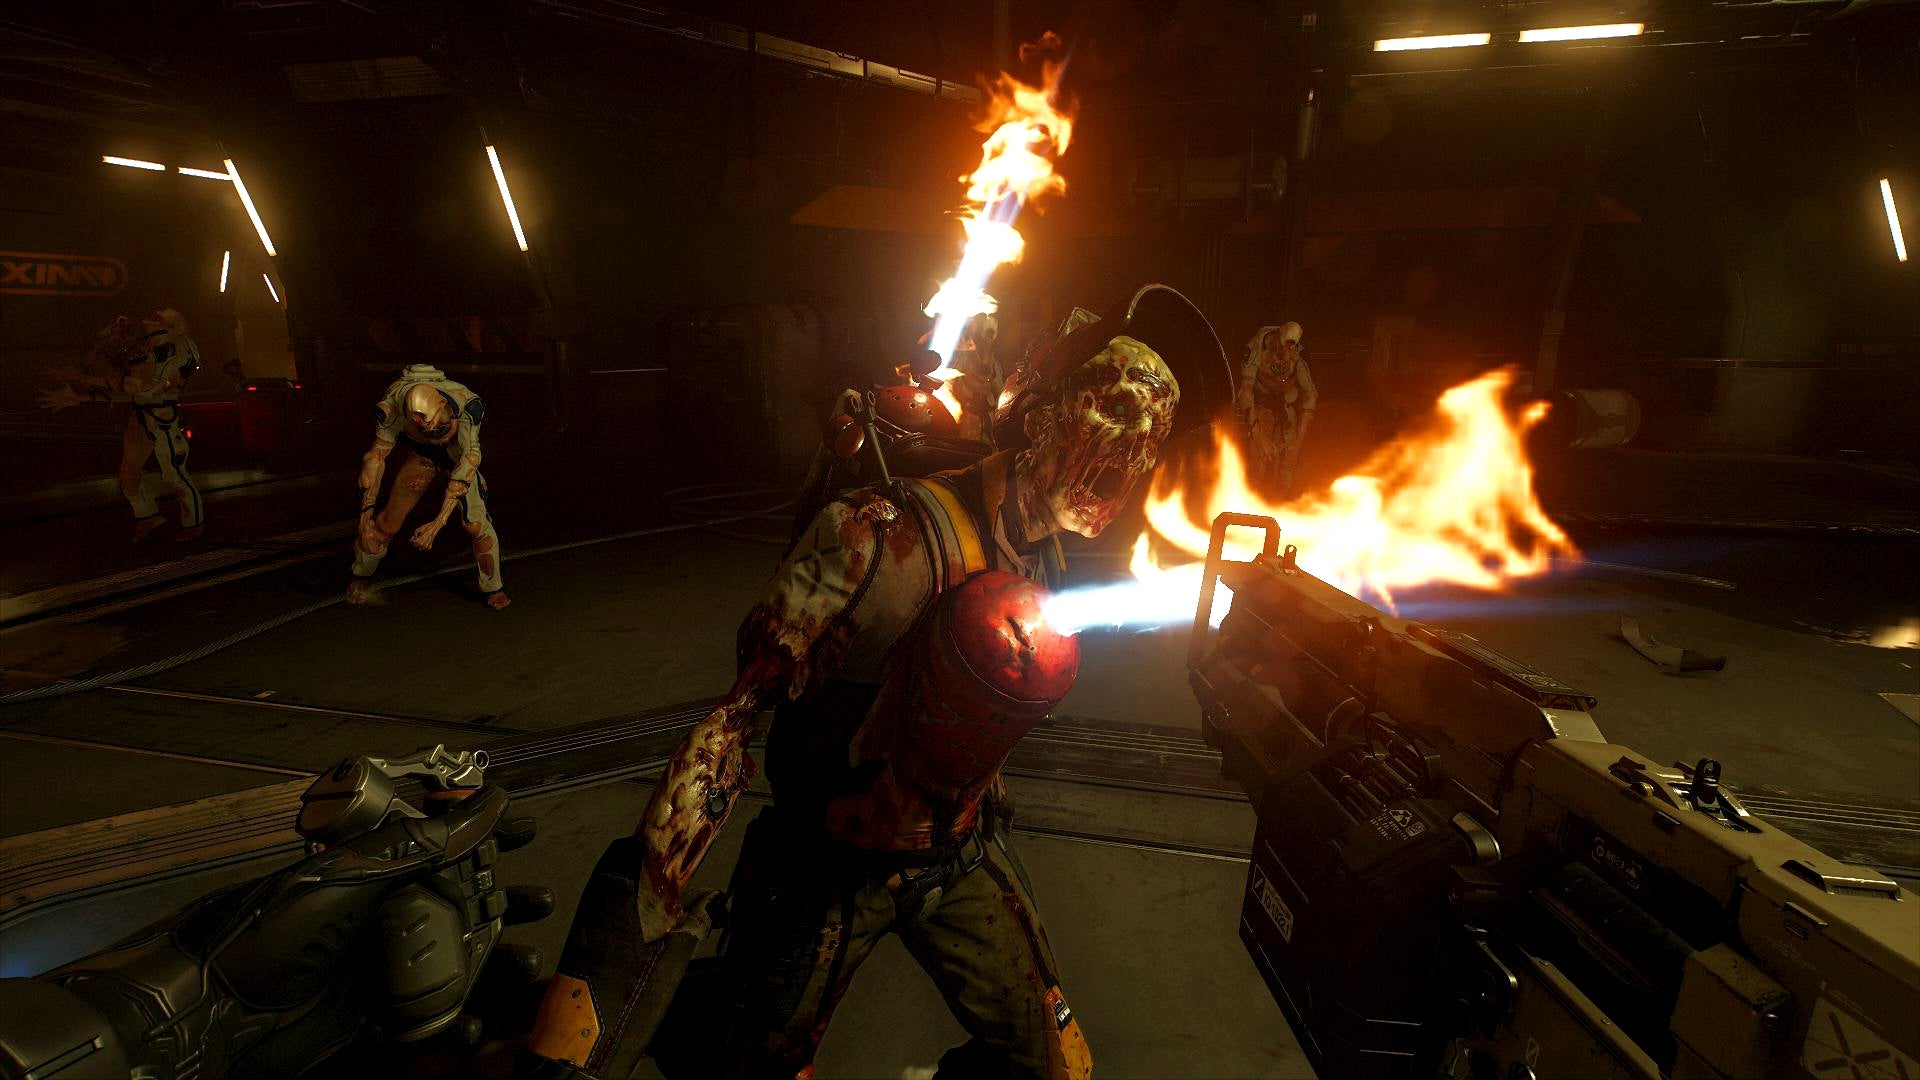 In-game action scene from Doom VFR with flaming demons.